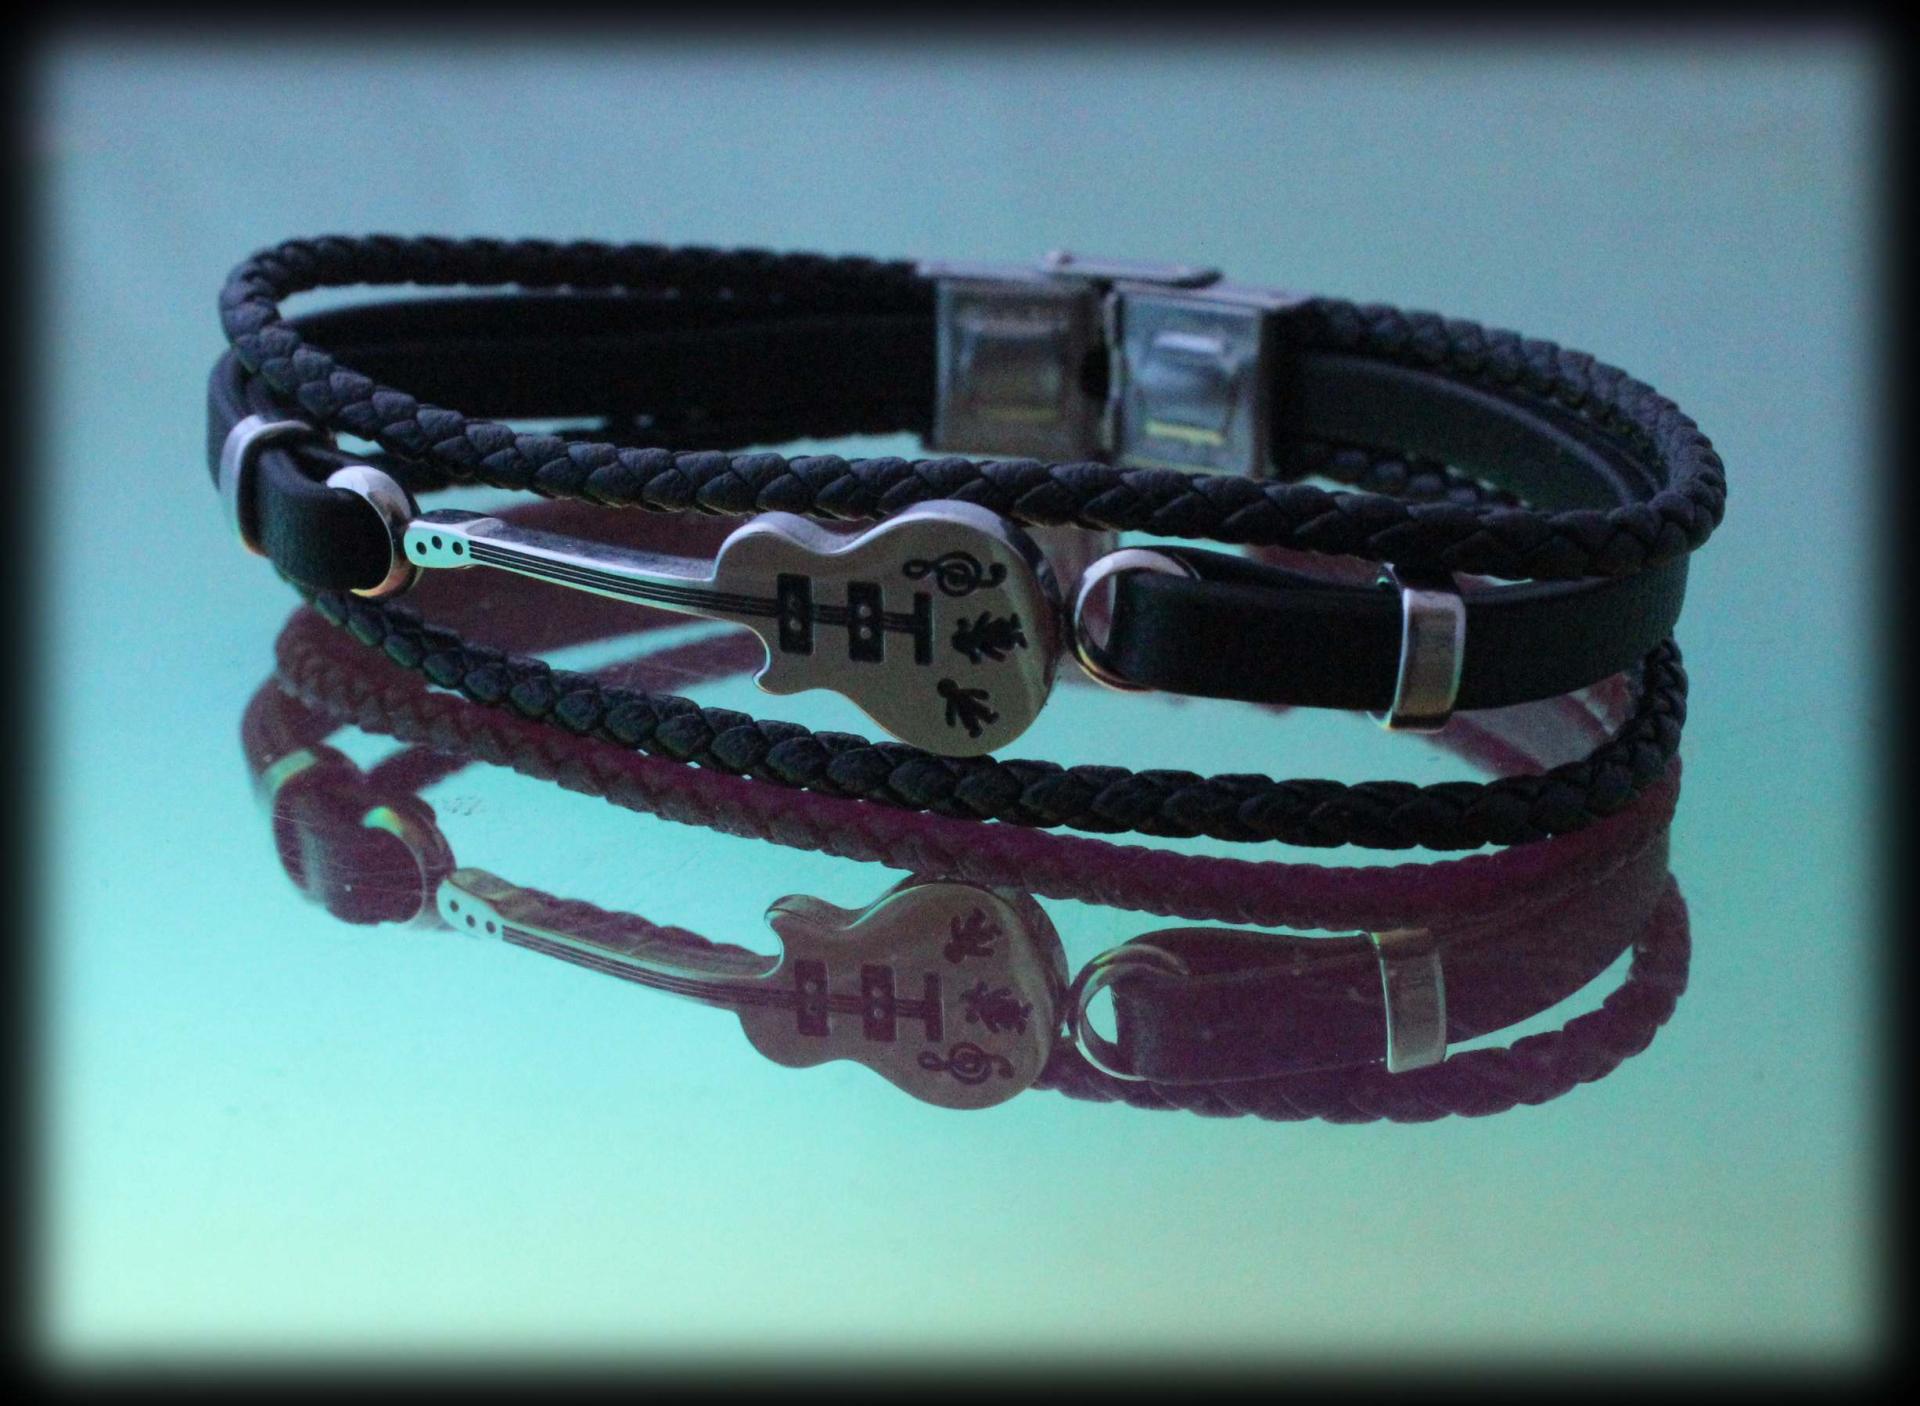 Guitar Bracelet - Stainless Steel and Leather